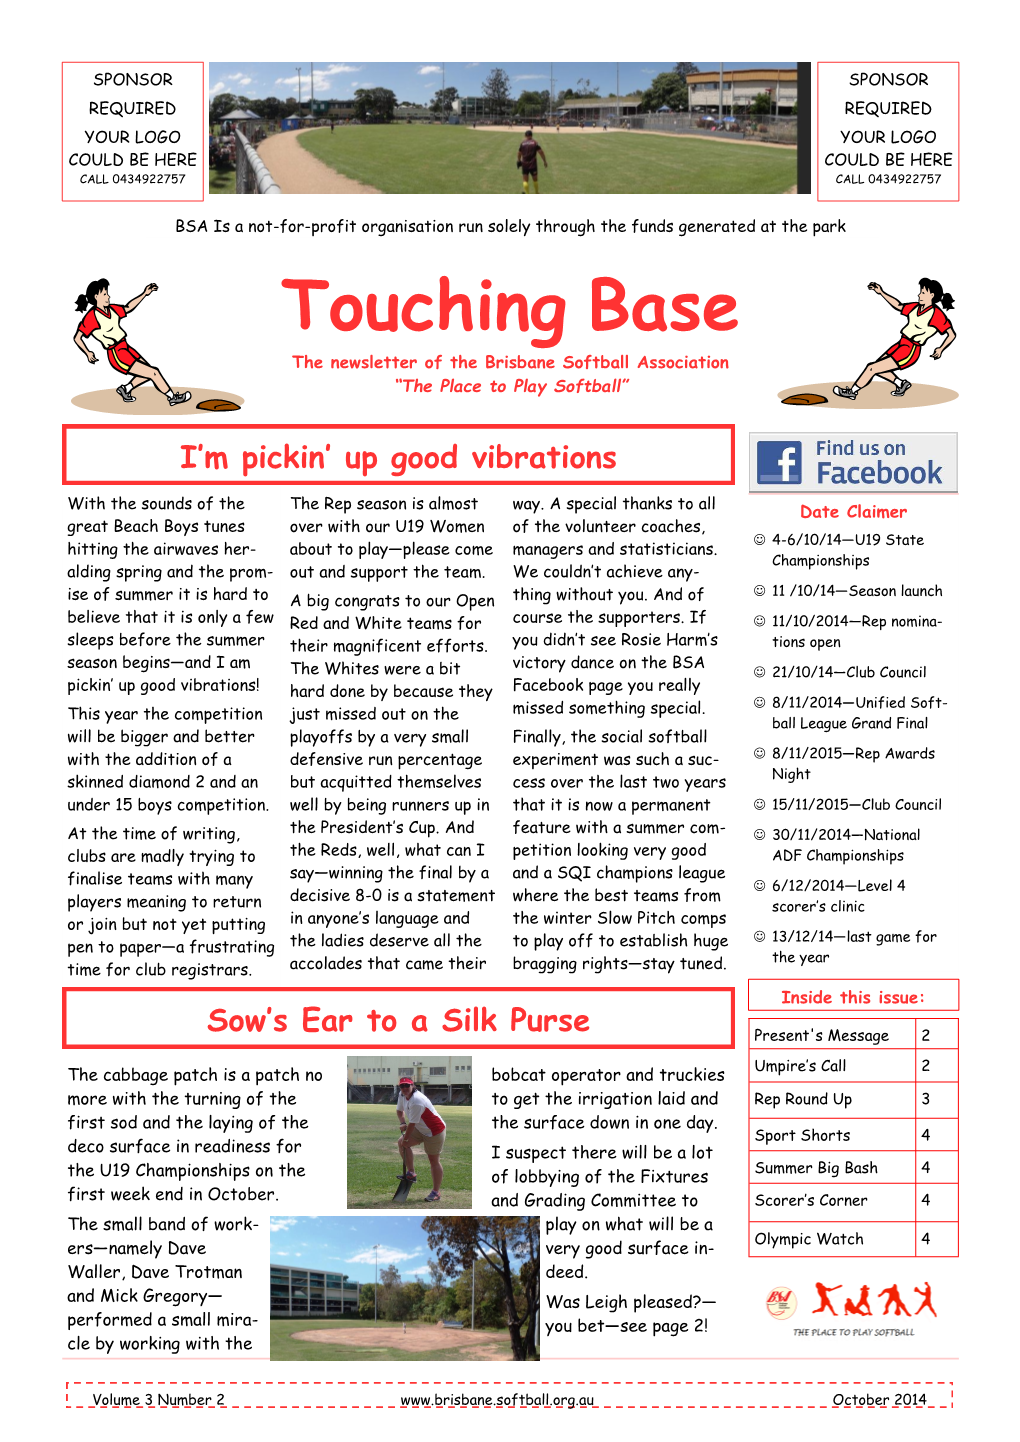 Touching Base the Newsletter of the Brisbane Softball Association “The Place to Play Softball”